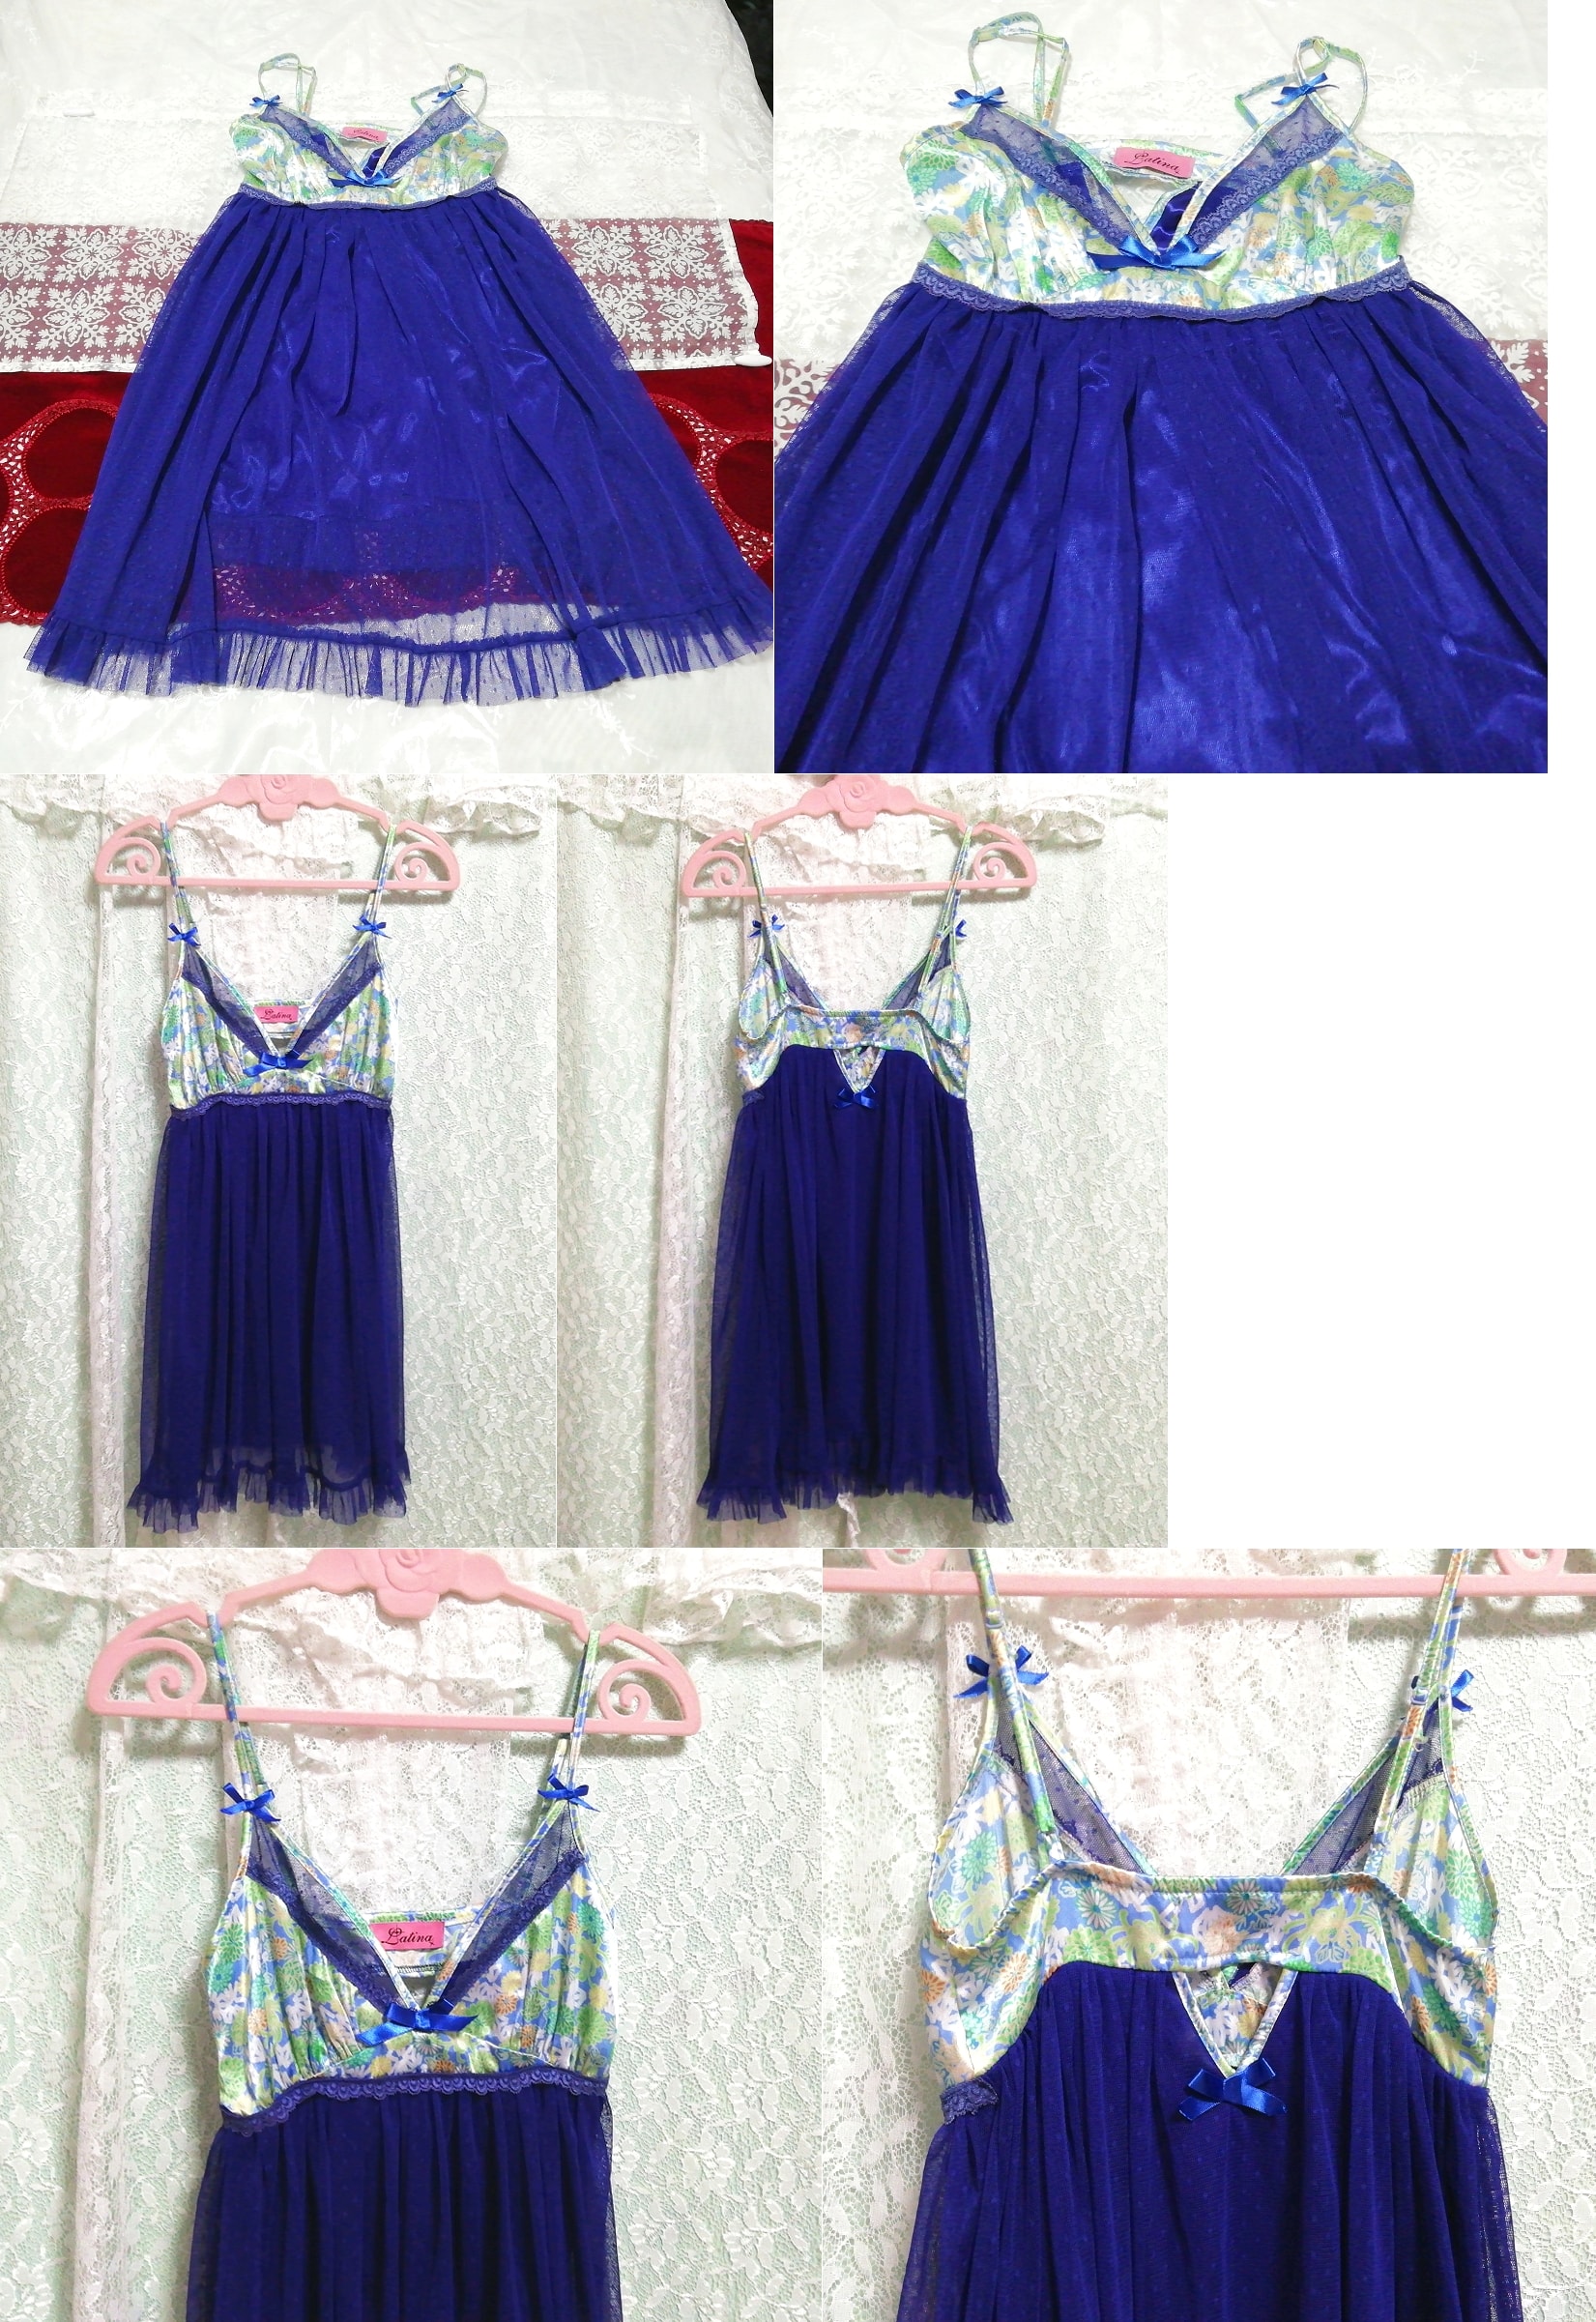 Blue green lace negligee nightgown camisole dress babydoll, fashion, ladies' fashion, camisole